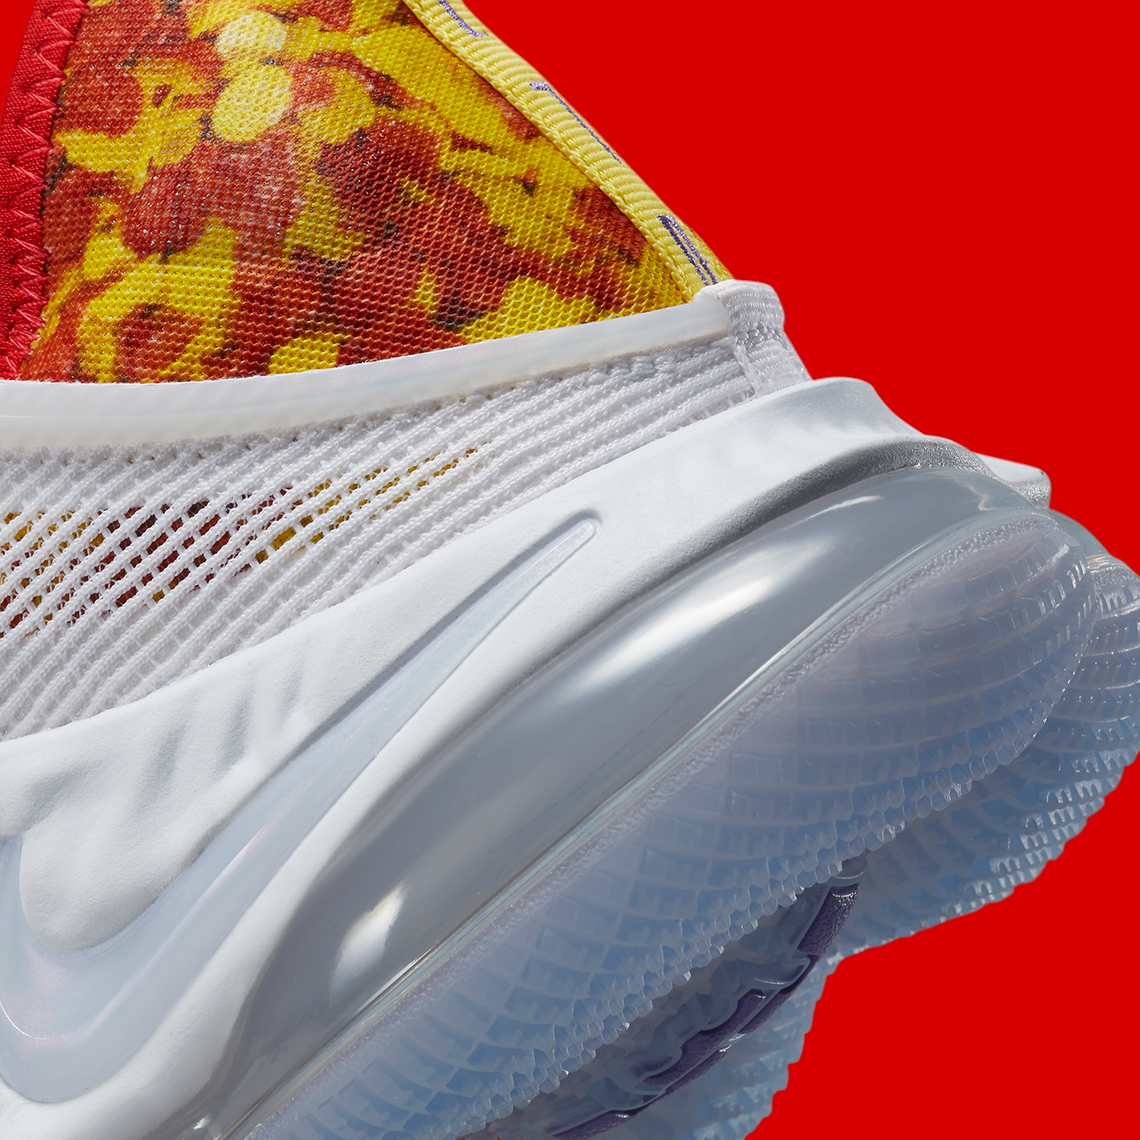 Nike Lebron 19 Low Fruity Pebbles Dq8344 100 Release Date 9